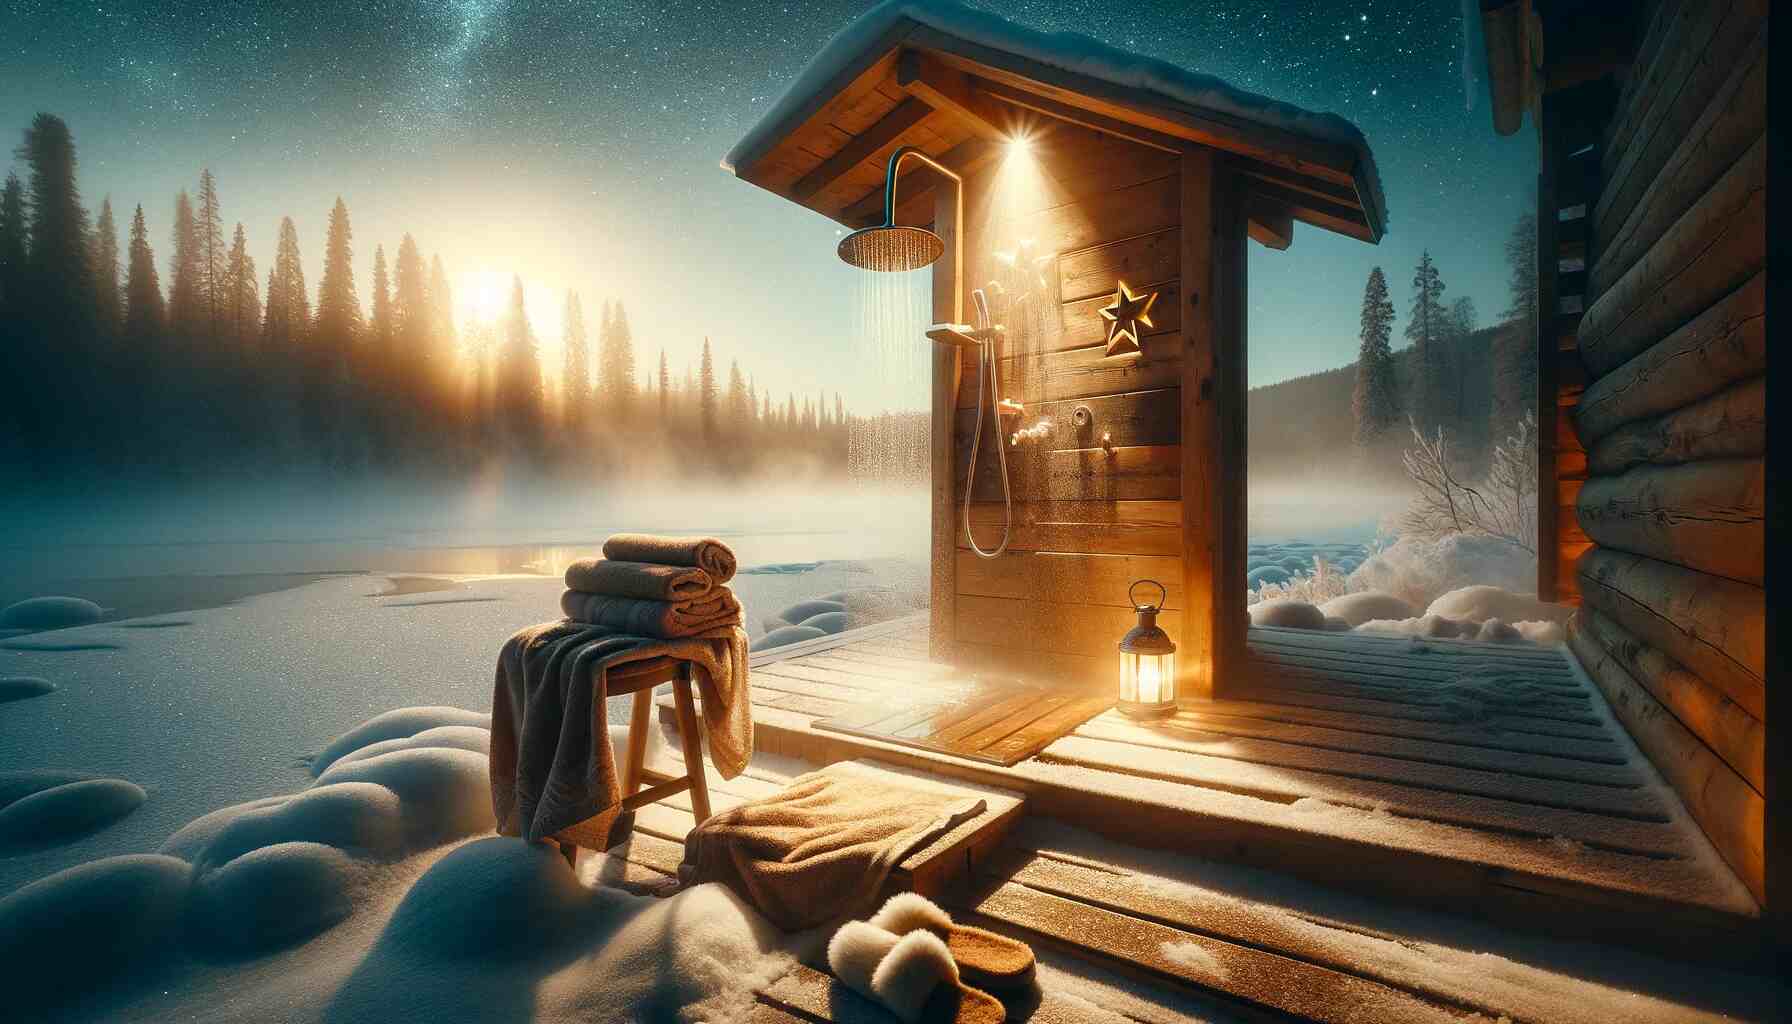 Feature image for How to Enjoy an Outdoor Shower in Winter: Solved. Cozy outdoor wooden shower in a snowy landscape at night, with steam rising from warm water, surrounded by soft, glowing lights. A clear starry sky is overhead, and the ground is covered in snow. In the foreground, a plush towel and comfortable slippers await on a wooden stool.